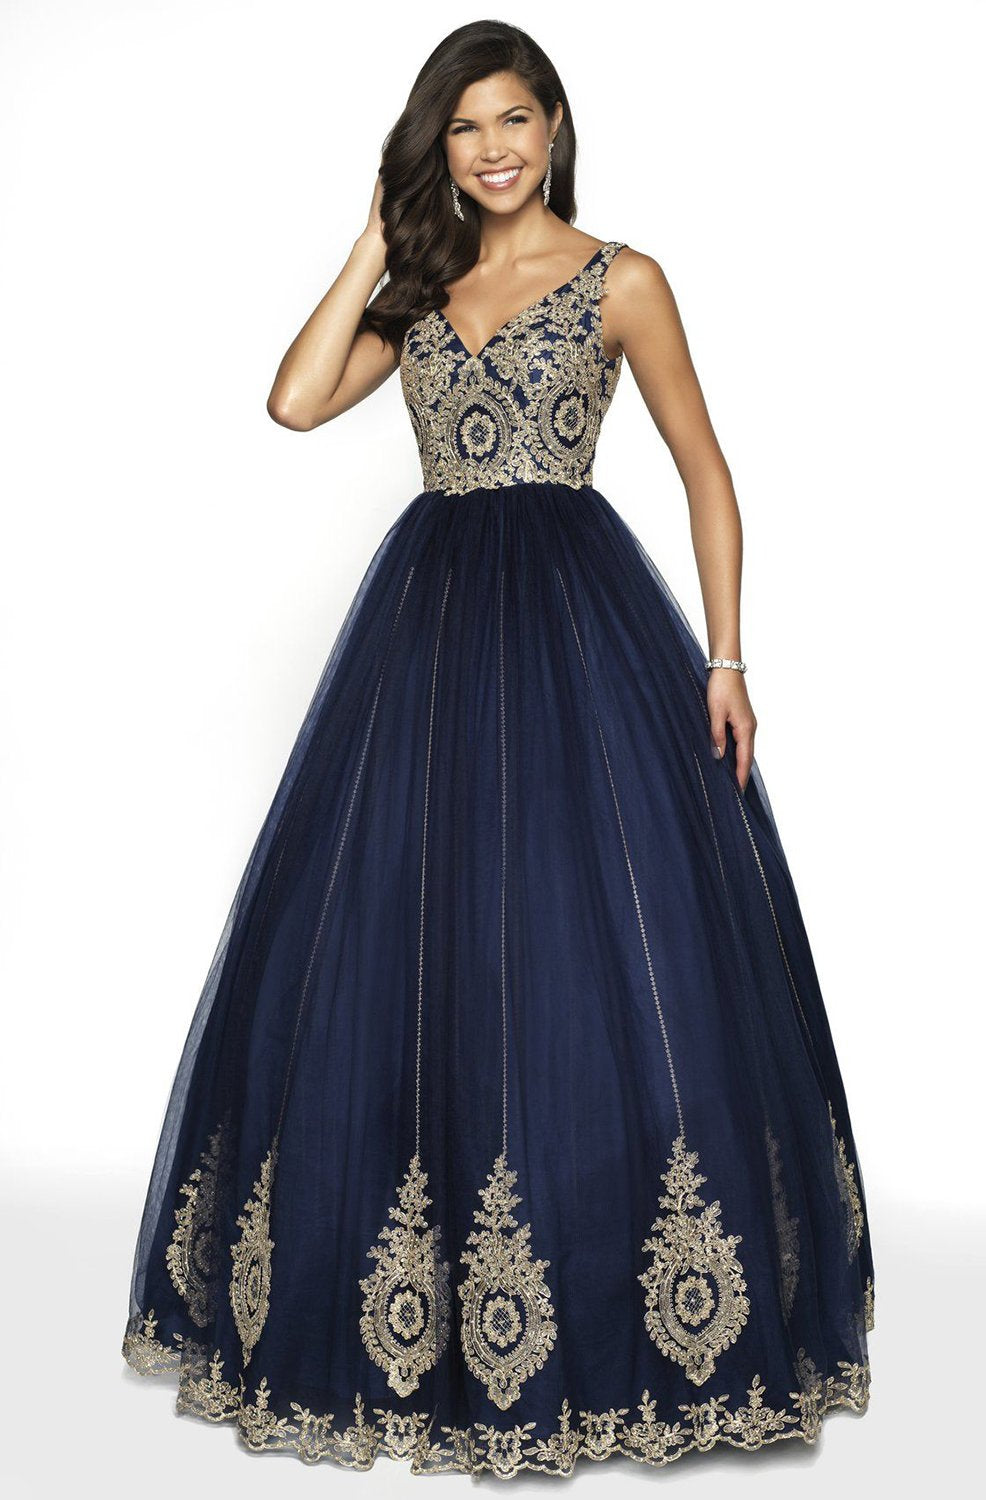 Blush by Alexia Designs - 5710 Metallic Lace V-neck Tulle Ballgown In Blue and Gold